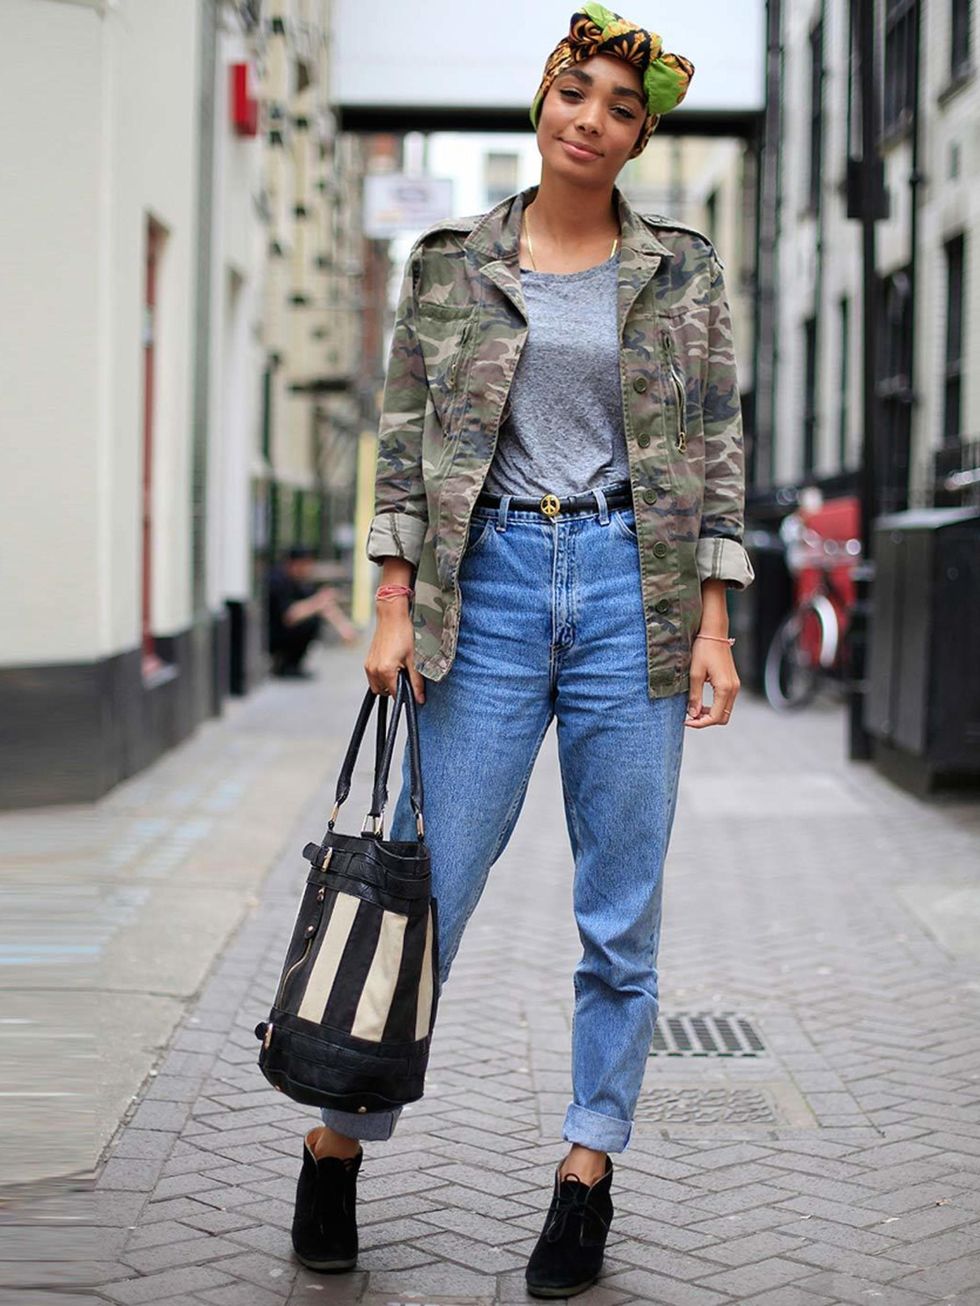 <p>Joanna, 26, TV Researcher. Topshop jacket and t-shirt, American Apparel jeans, Clarks shoes, vintage headscarf, Deena &amp; Ozzy bag.</p><p>Photo by Silvia Olsen @ Anthea Simms</p>